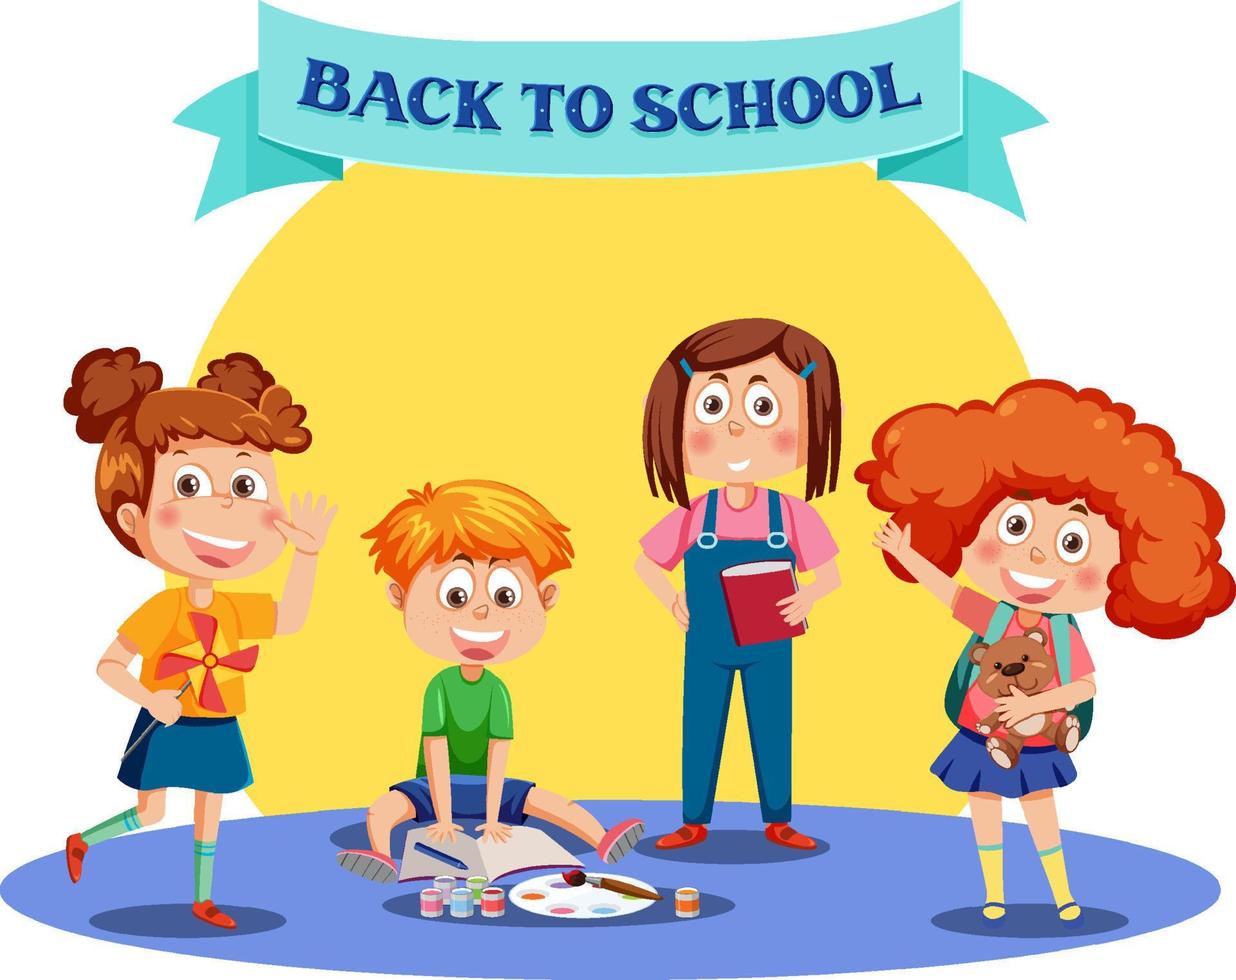 Back to school with kids cartoon character vector